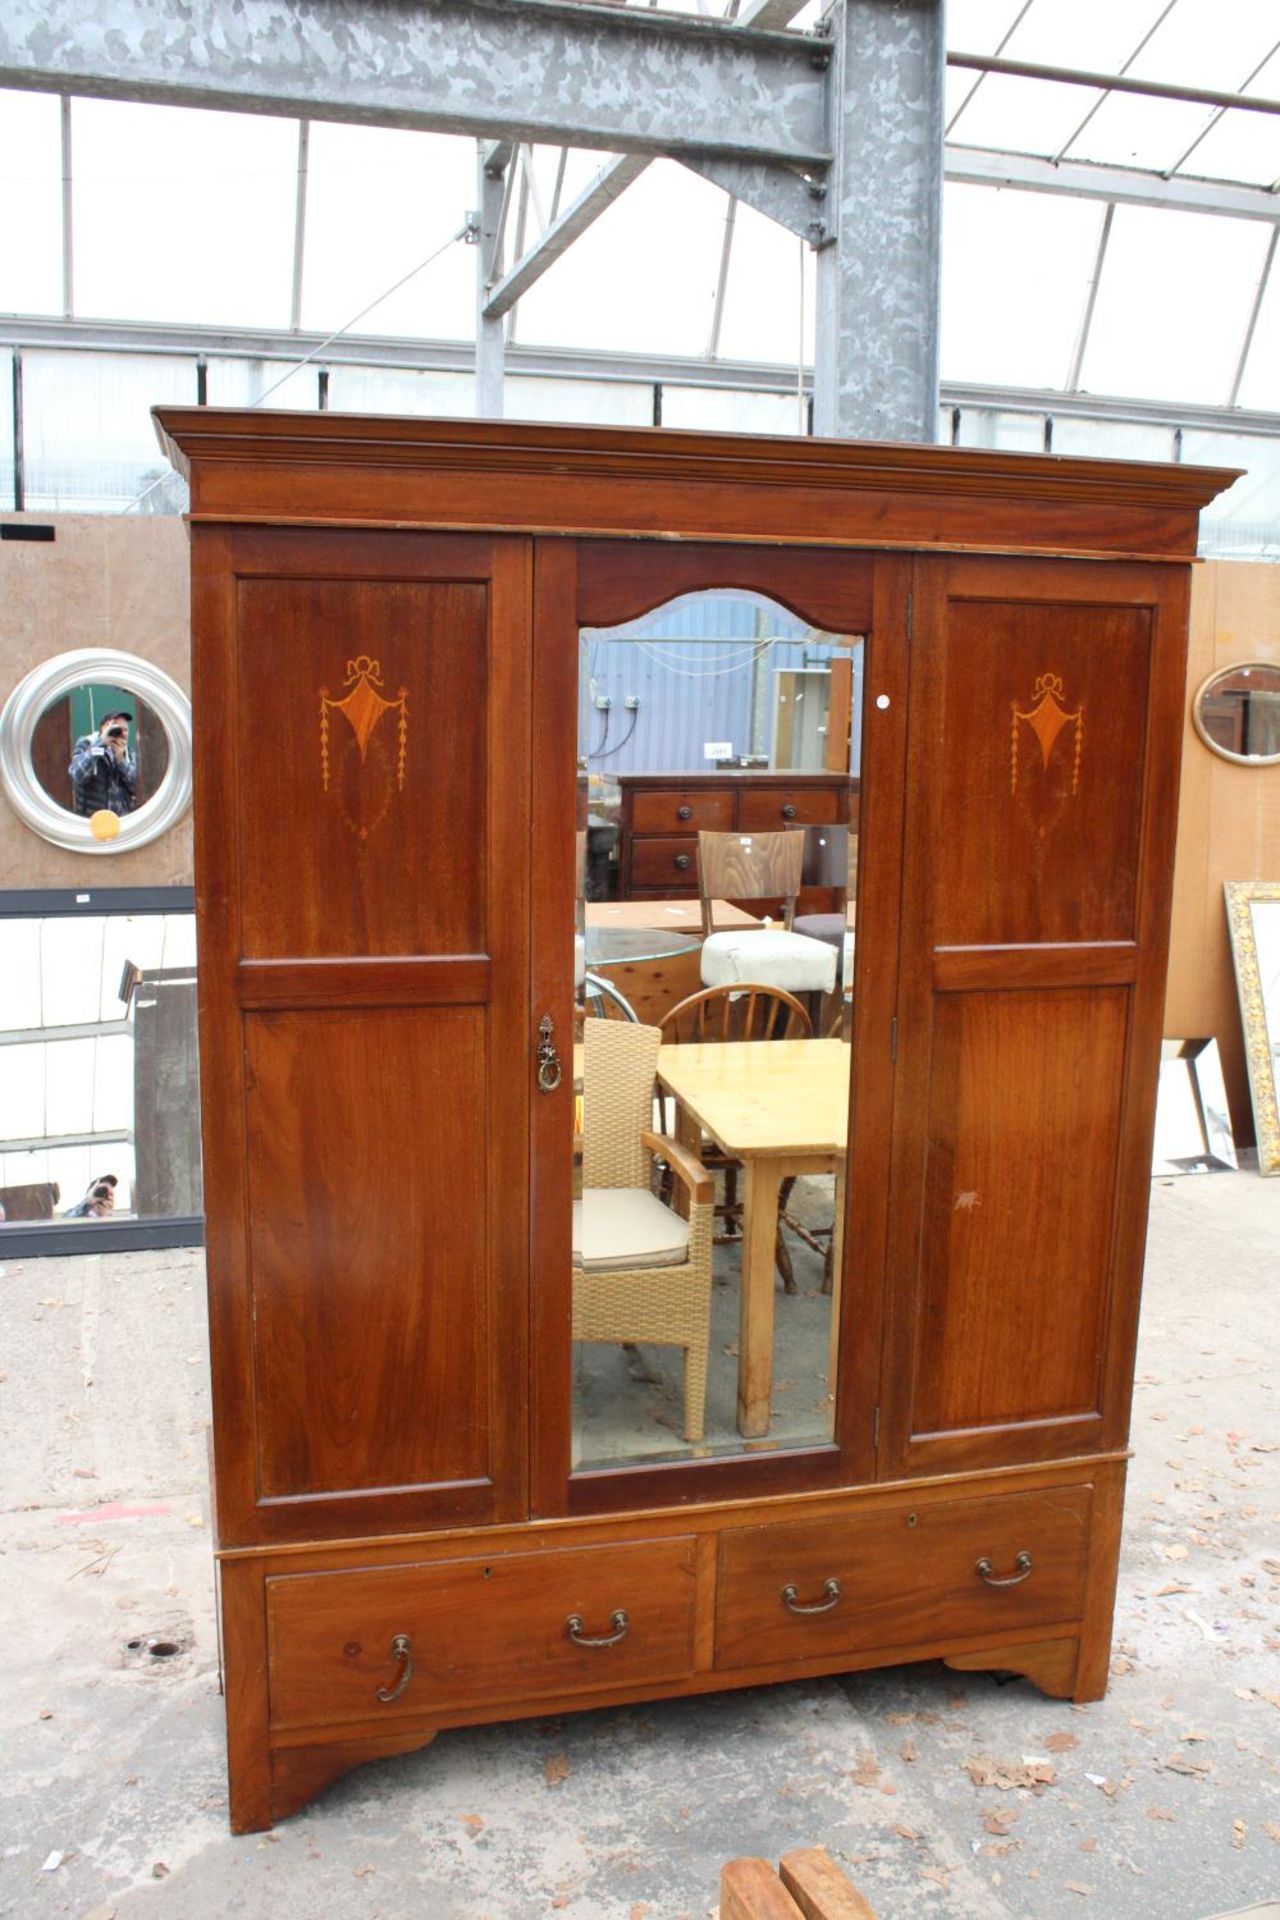 AN EDWARDIAN MAHOGANY AND INLAID MIRROR DOOR WARDROBE WITH TWO DRAWERS TO BASE, 62" WIDE